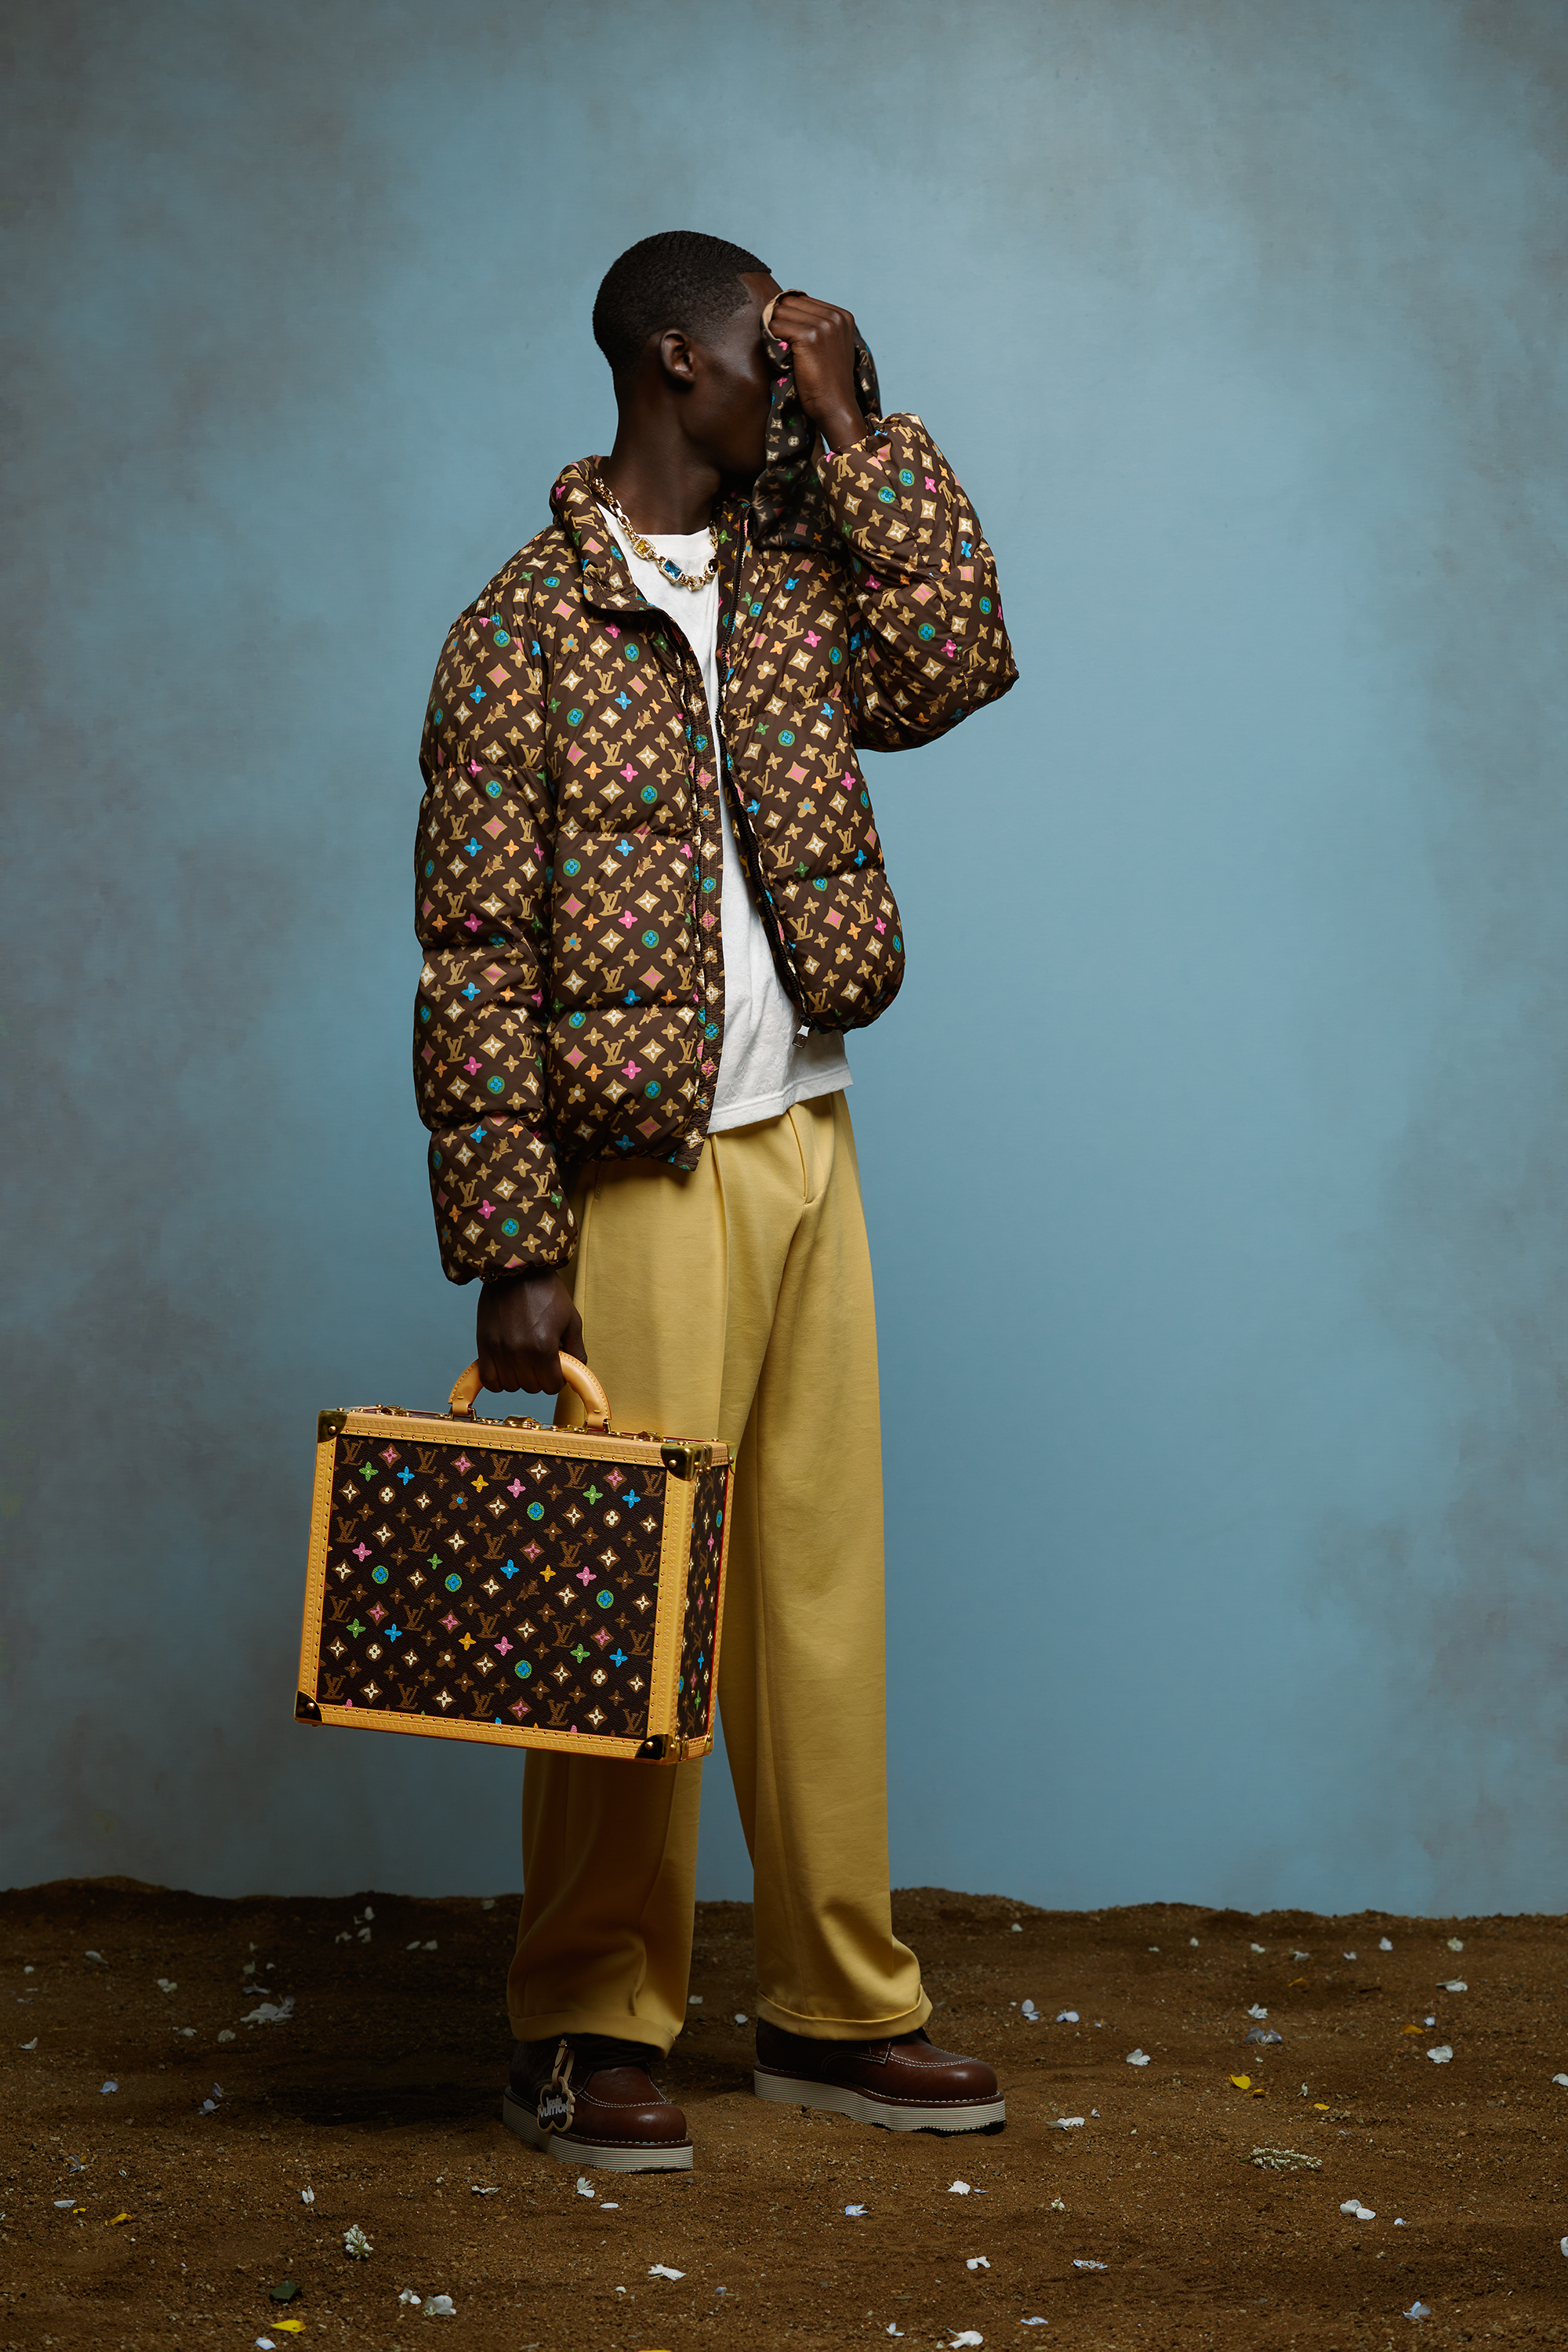 Man in patterned jacket and yellow trousers holding a patterned suitcase, posing in profile